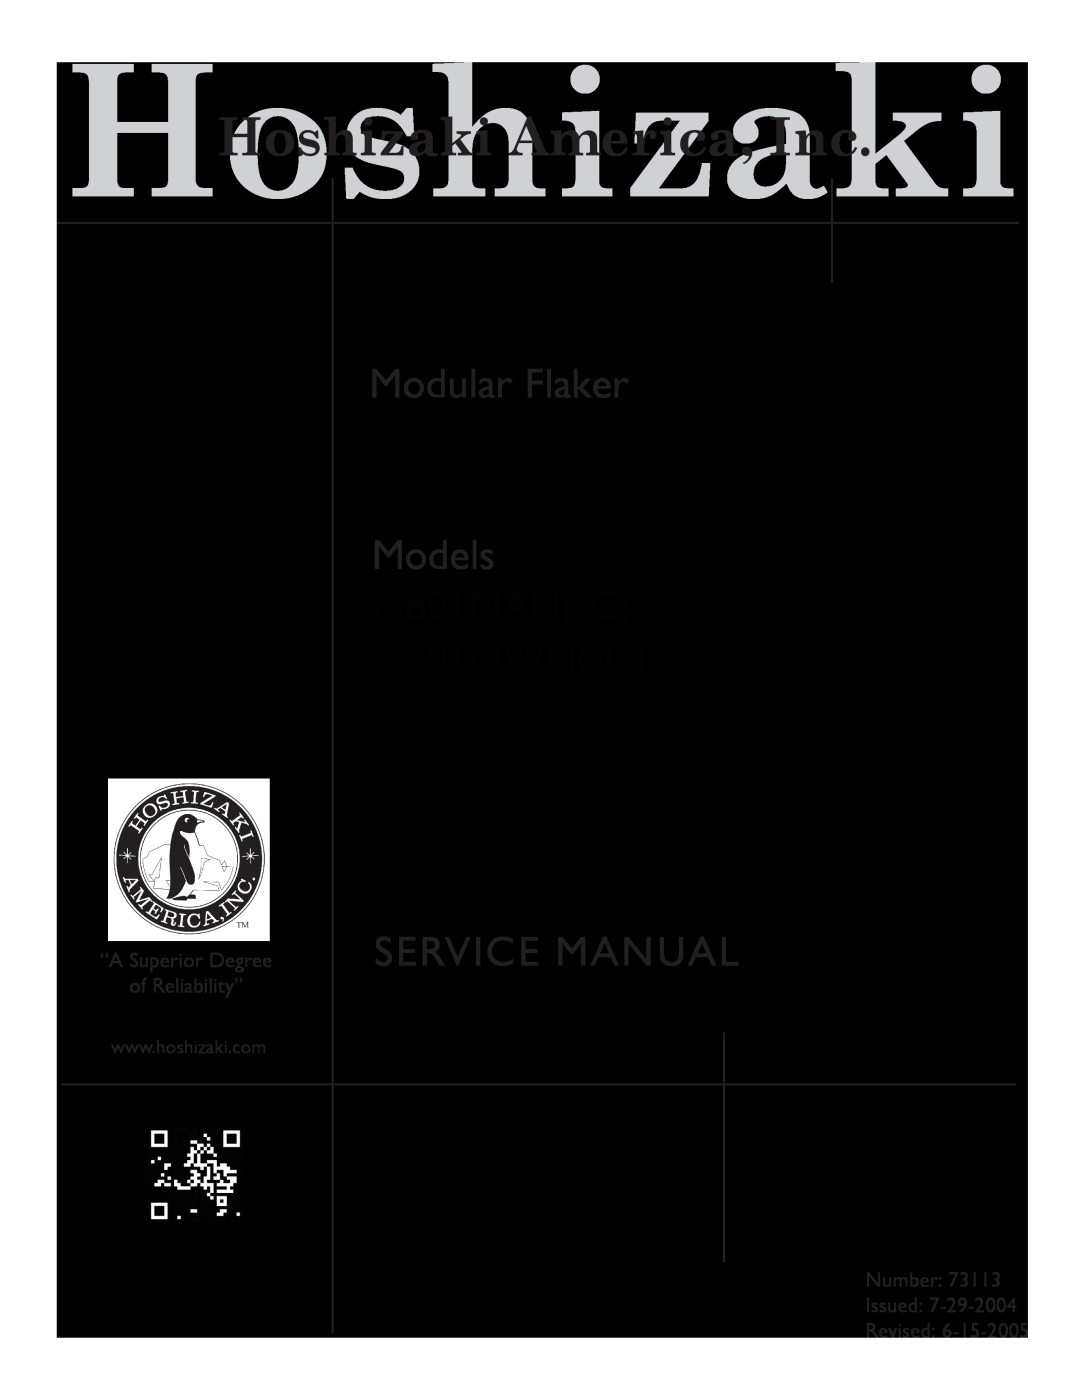 Hoshizaki F-80 I MAH (-c), F-80 I MWH (-c) service manual “A Superior Degree of Reliability”, Number Issued Revised 